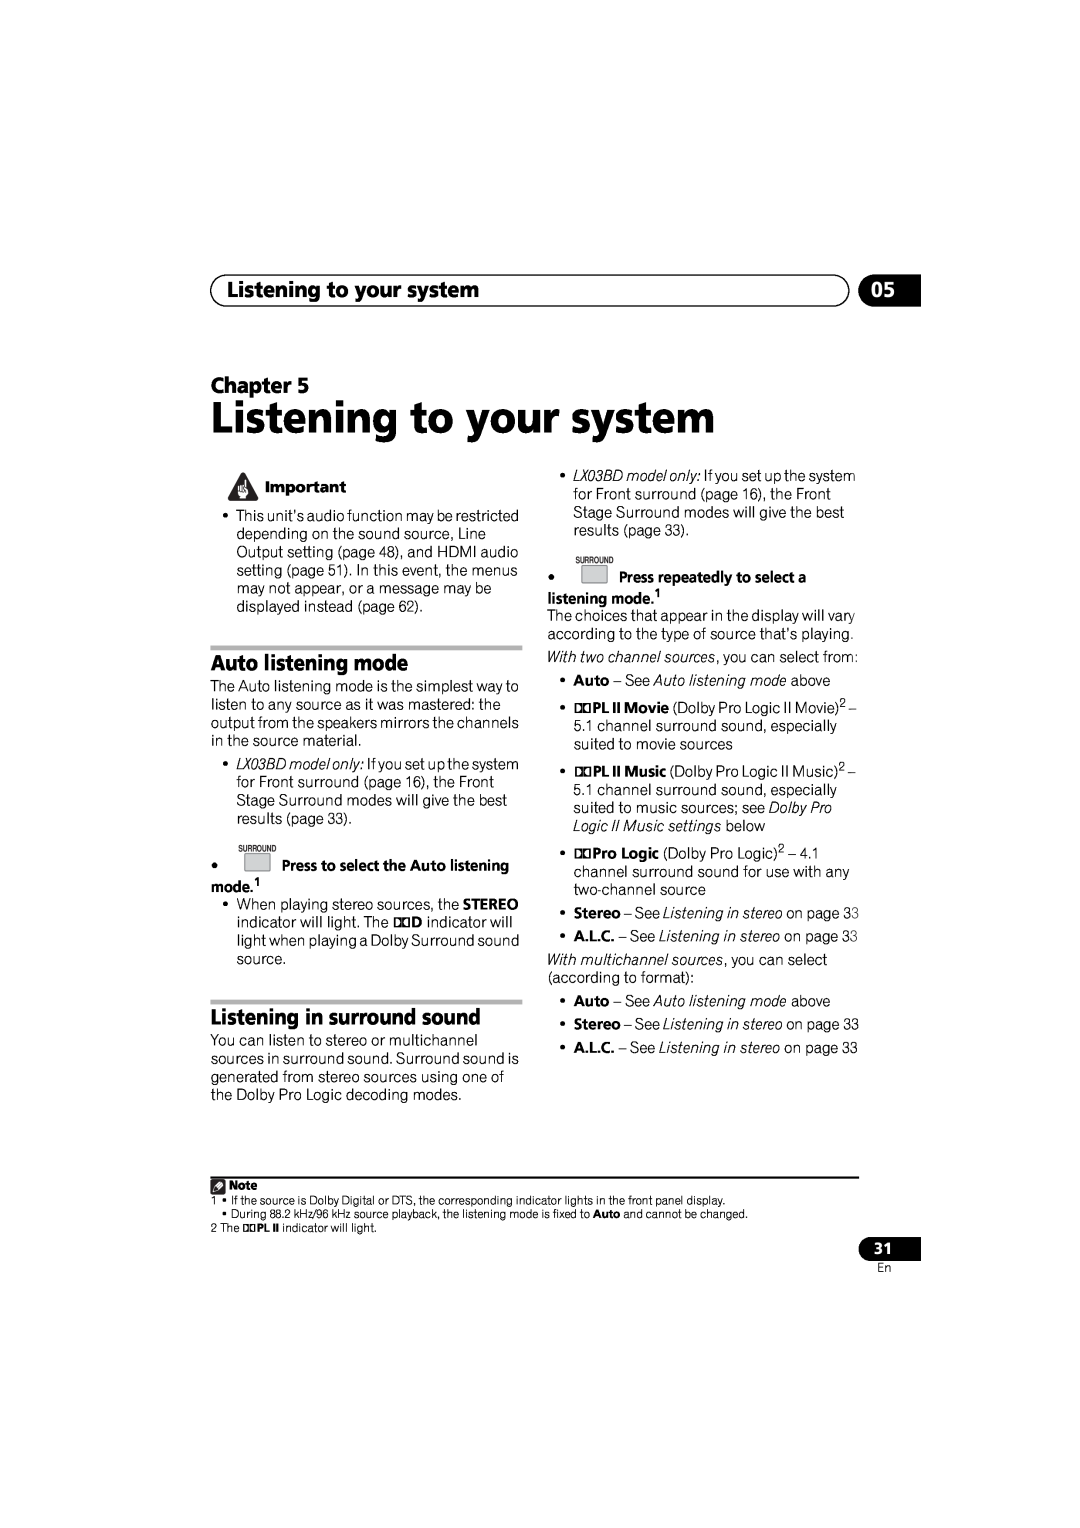 Pioneer SX-LX03 manual Listening to your system Chapter, Auto listening mode, Listening in surround sound, English 